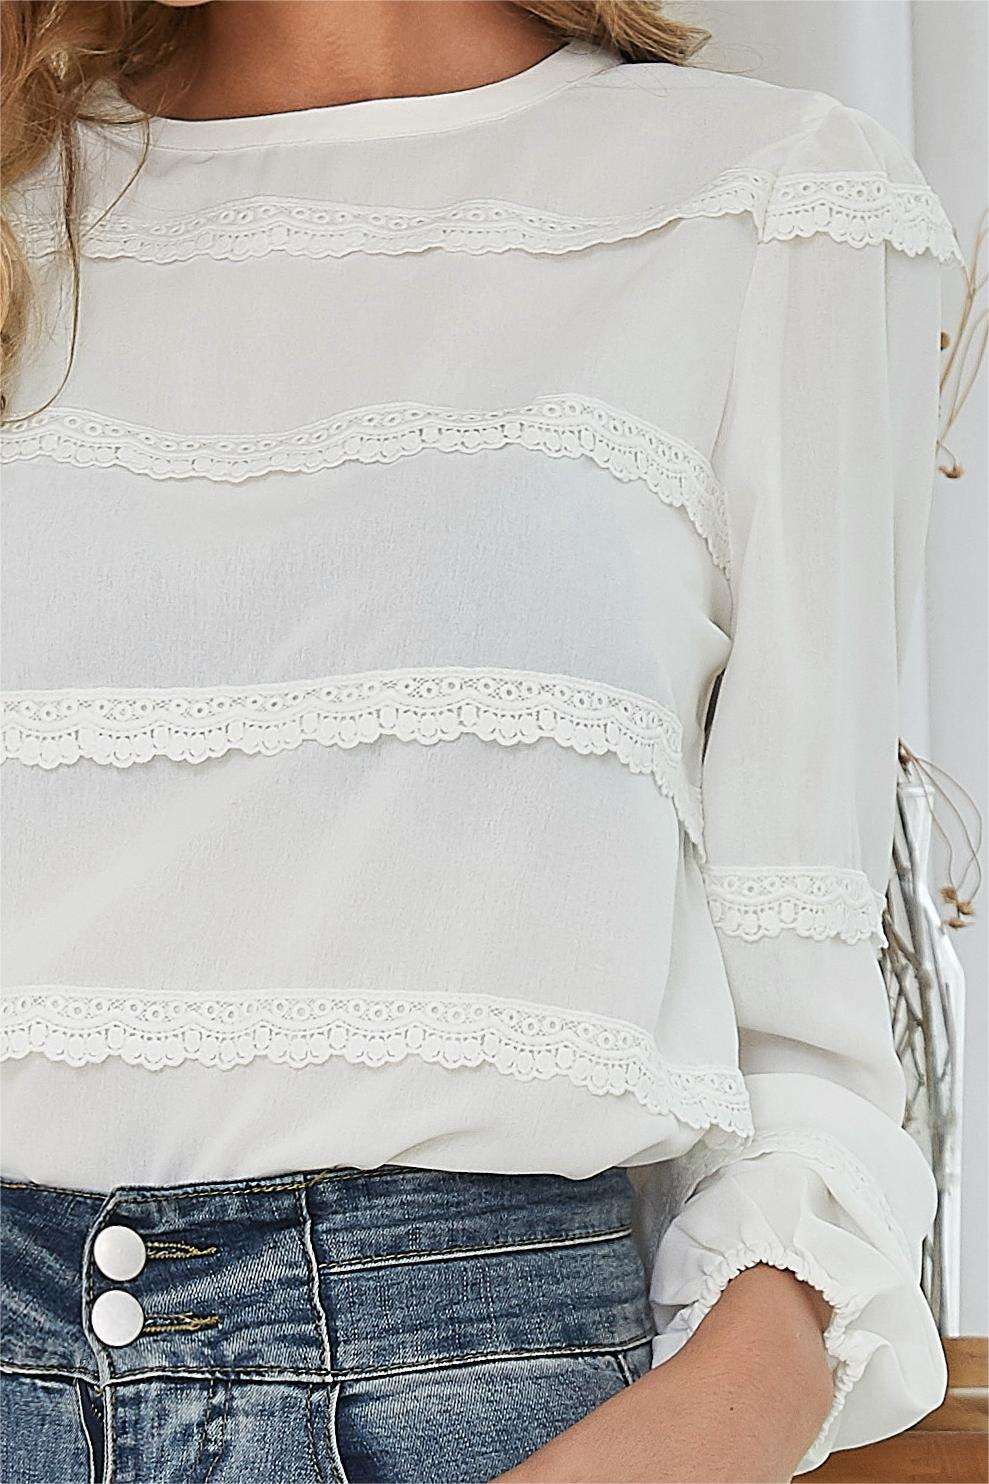 GRACE KARIN Lace Decorated Tiered Puffed Blouse